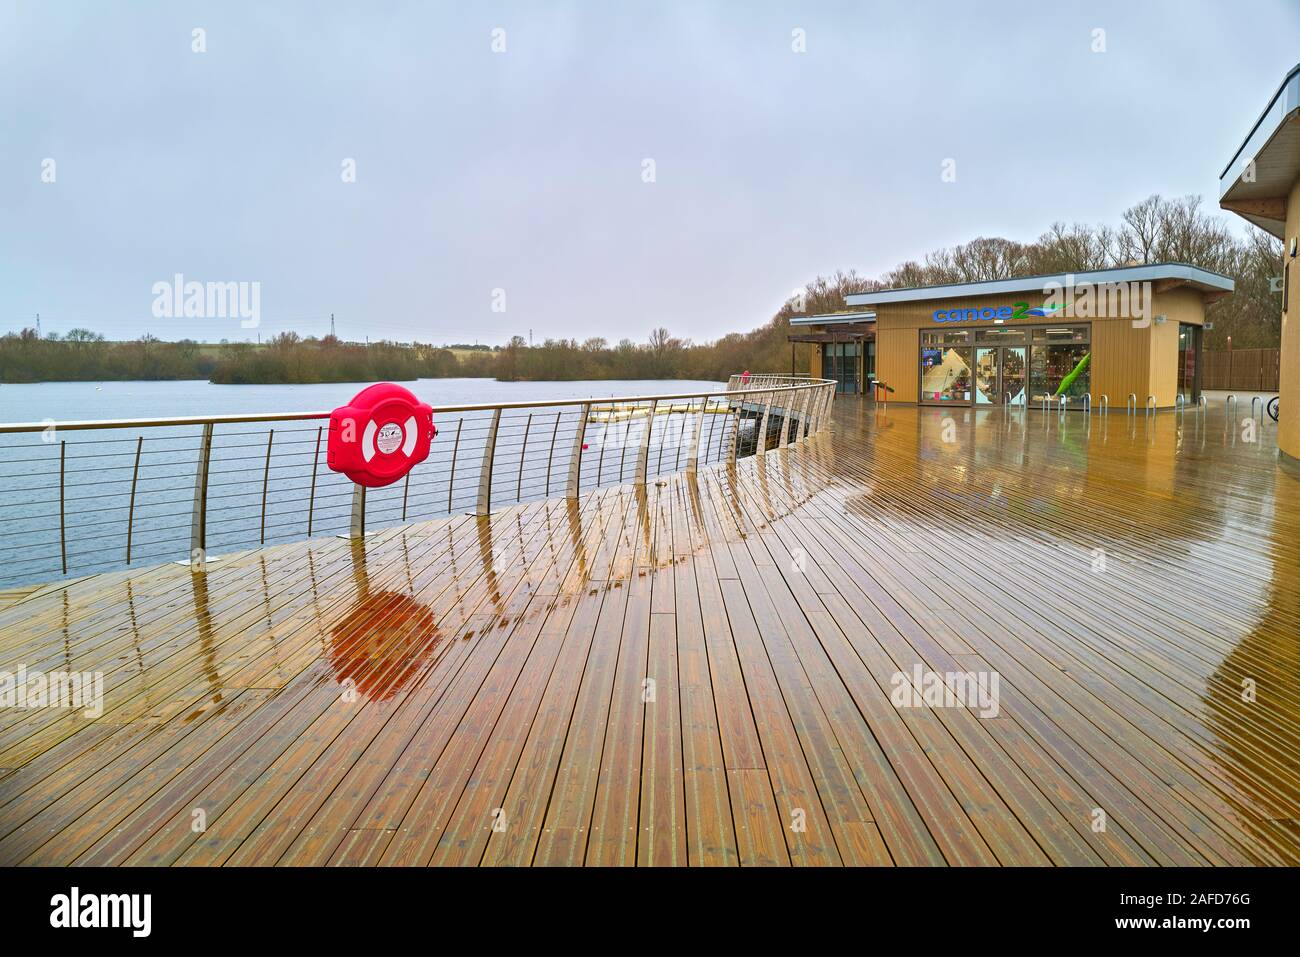 Page 2 - Rushden Lakes High Resolution Stock Photography and Images - Alamy